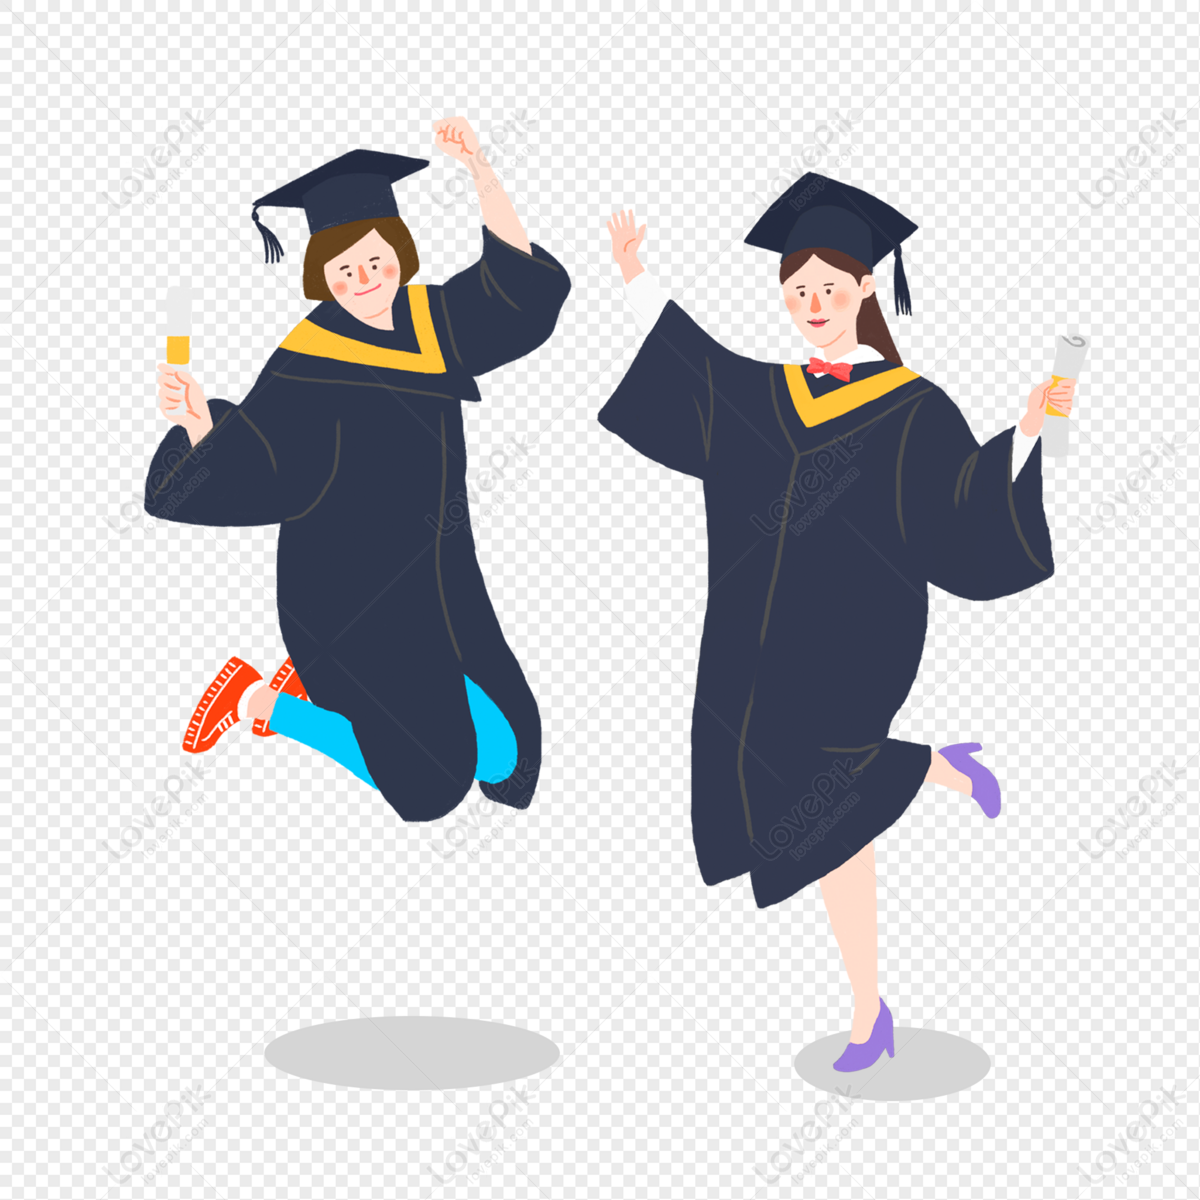 Graduation Season Pictures PNG Images With Transparent Background ...